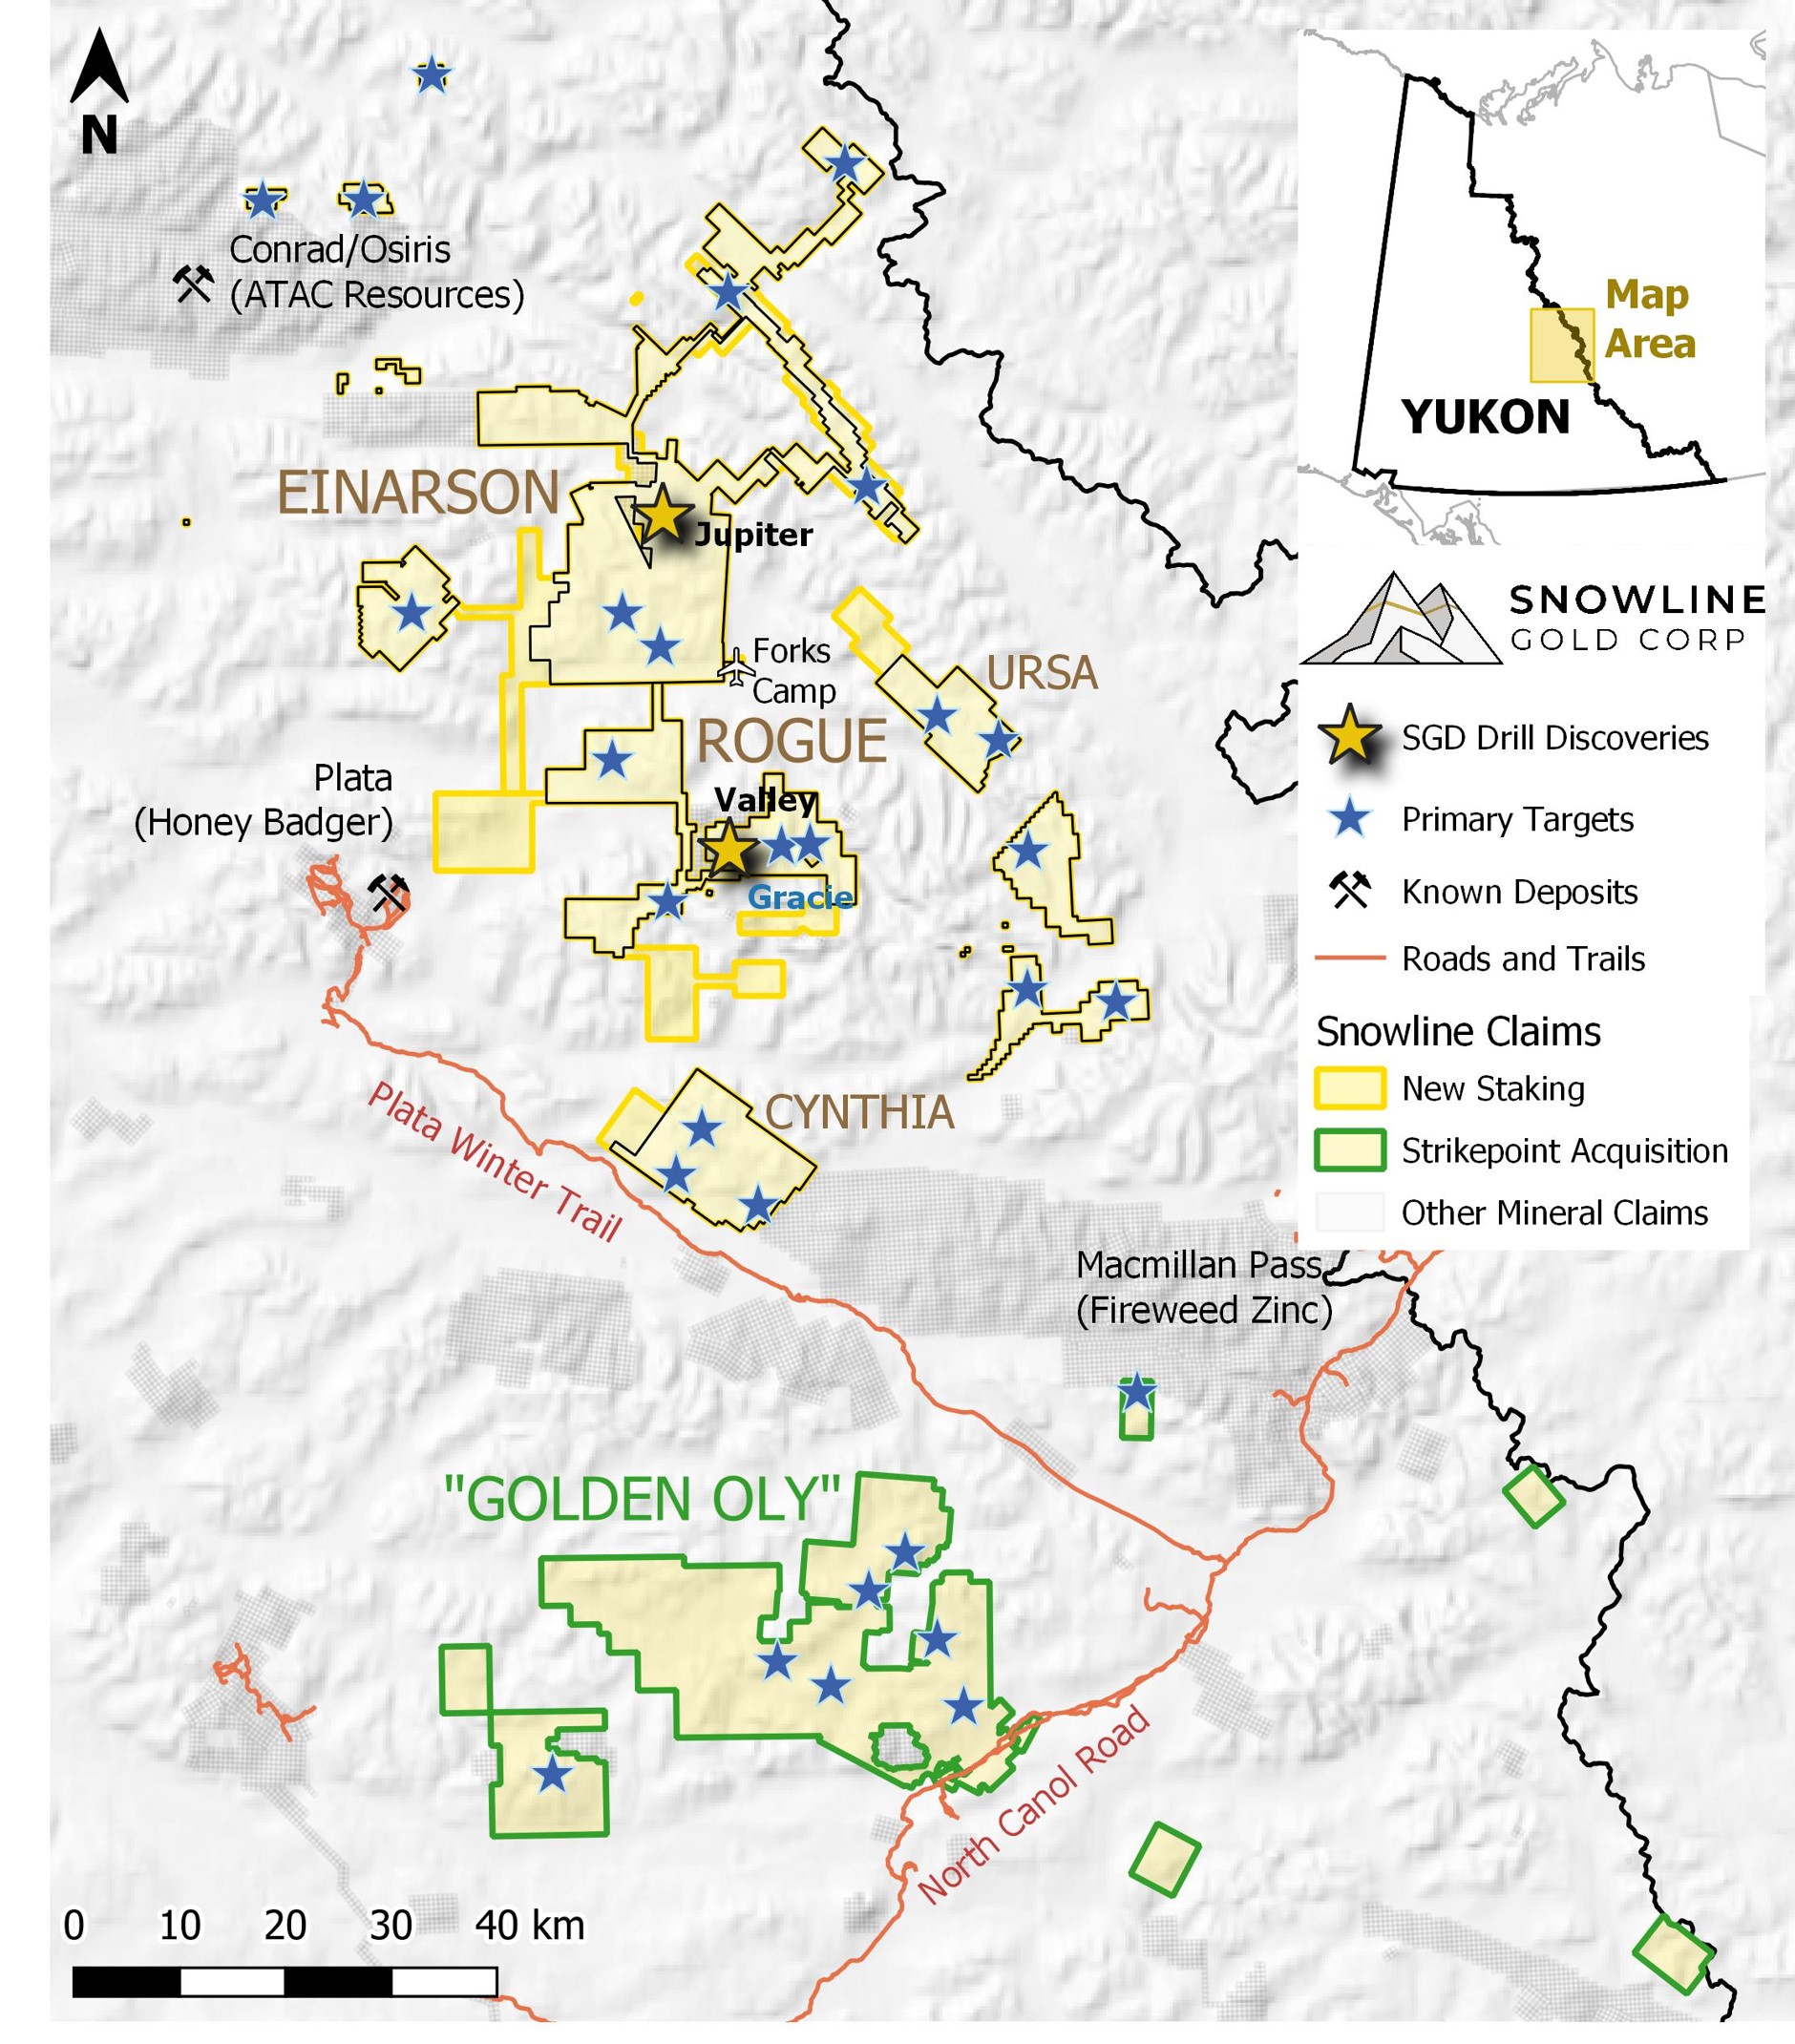 Snowline Gold Corp., Tuesday, September 20, 2022, Press release picture